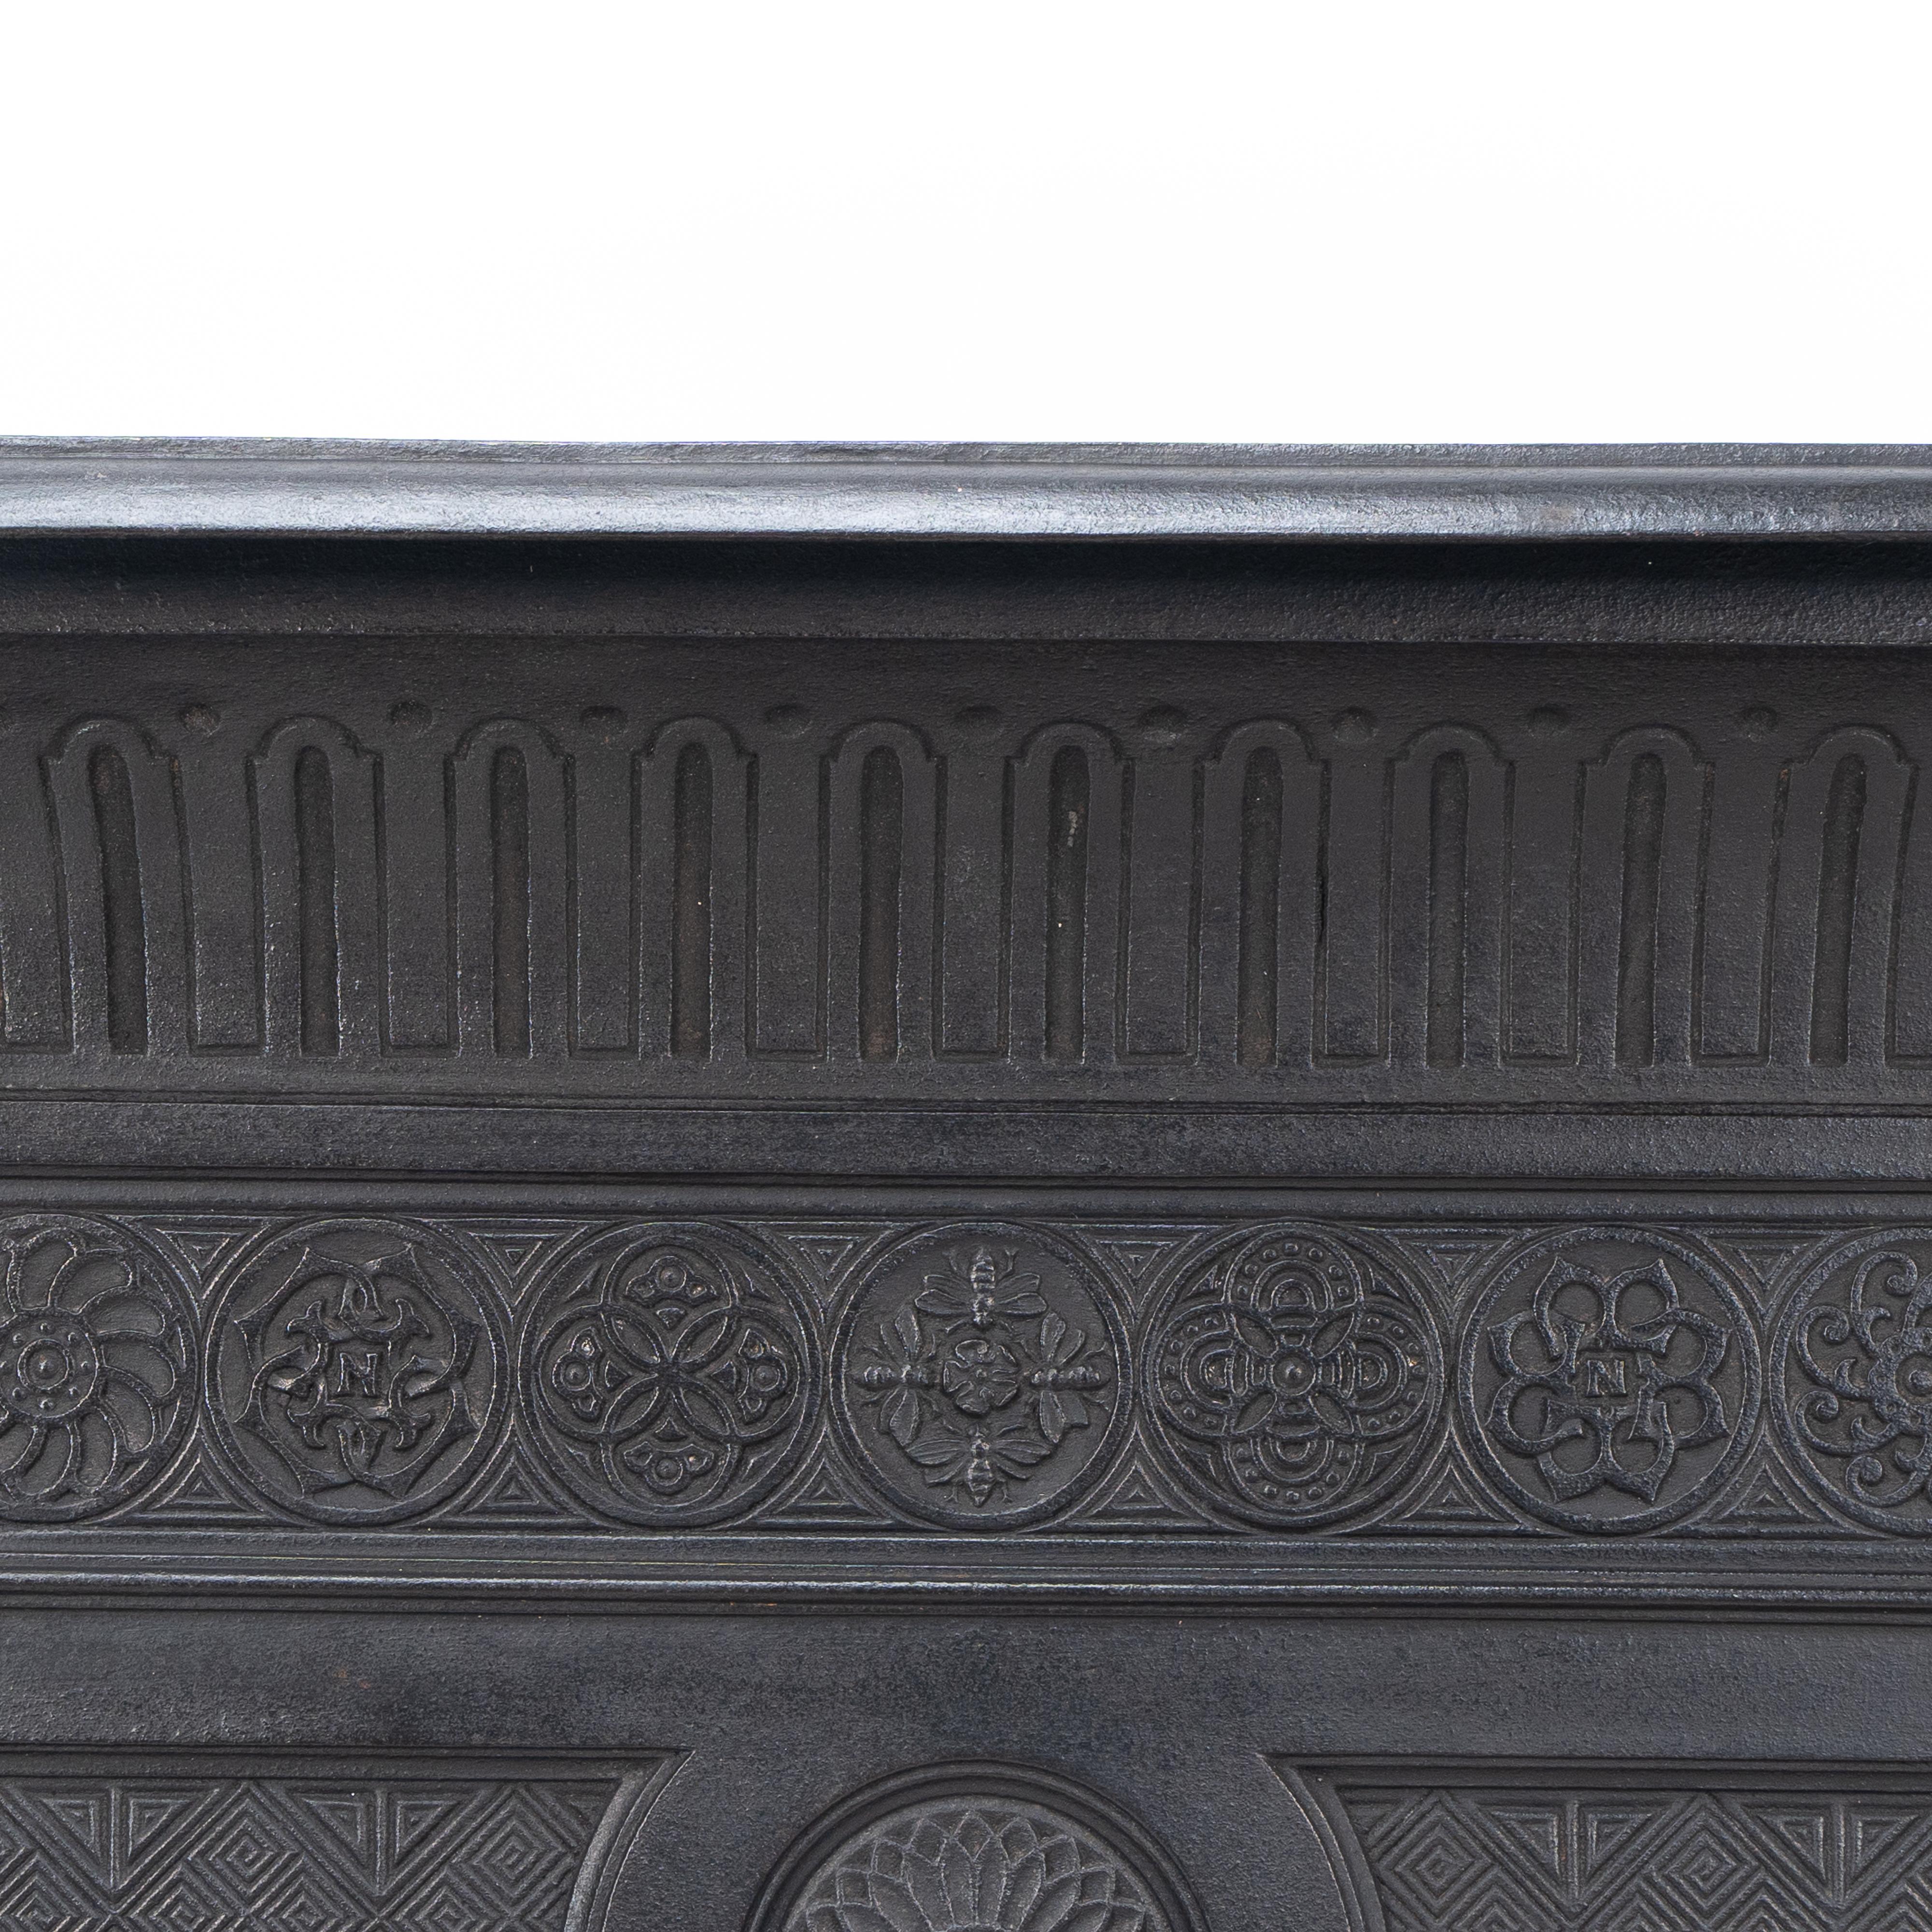 Cast Thomas Jeckyll for Barnard Bishop & Barnard. A rare Aesthetic Movement fireplace For Sale